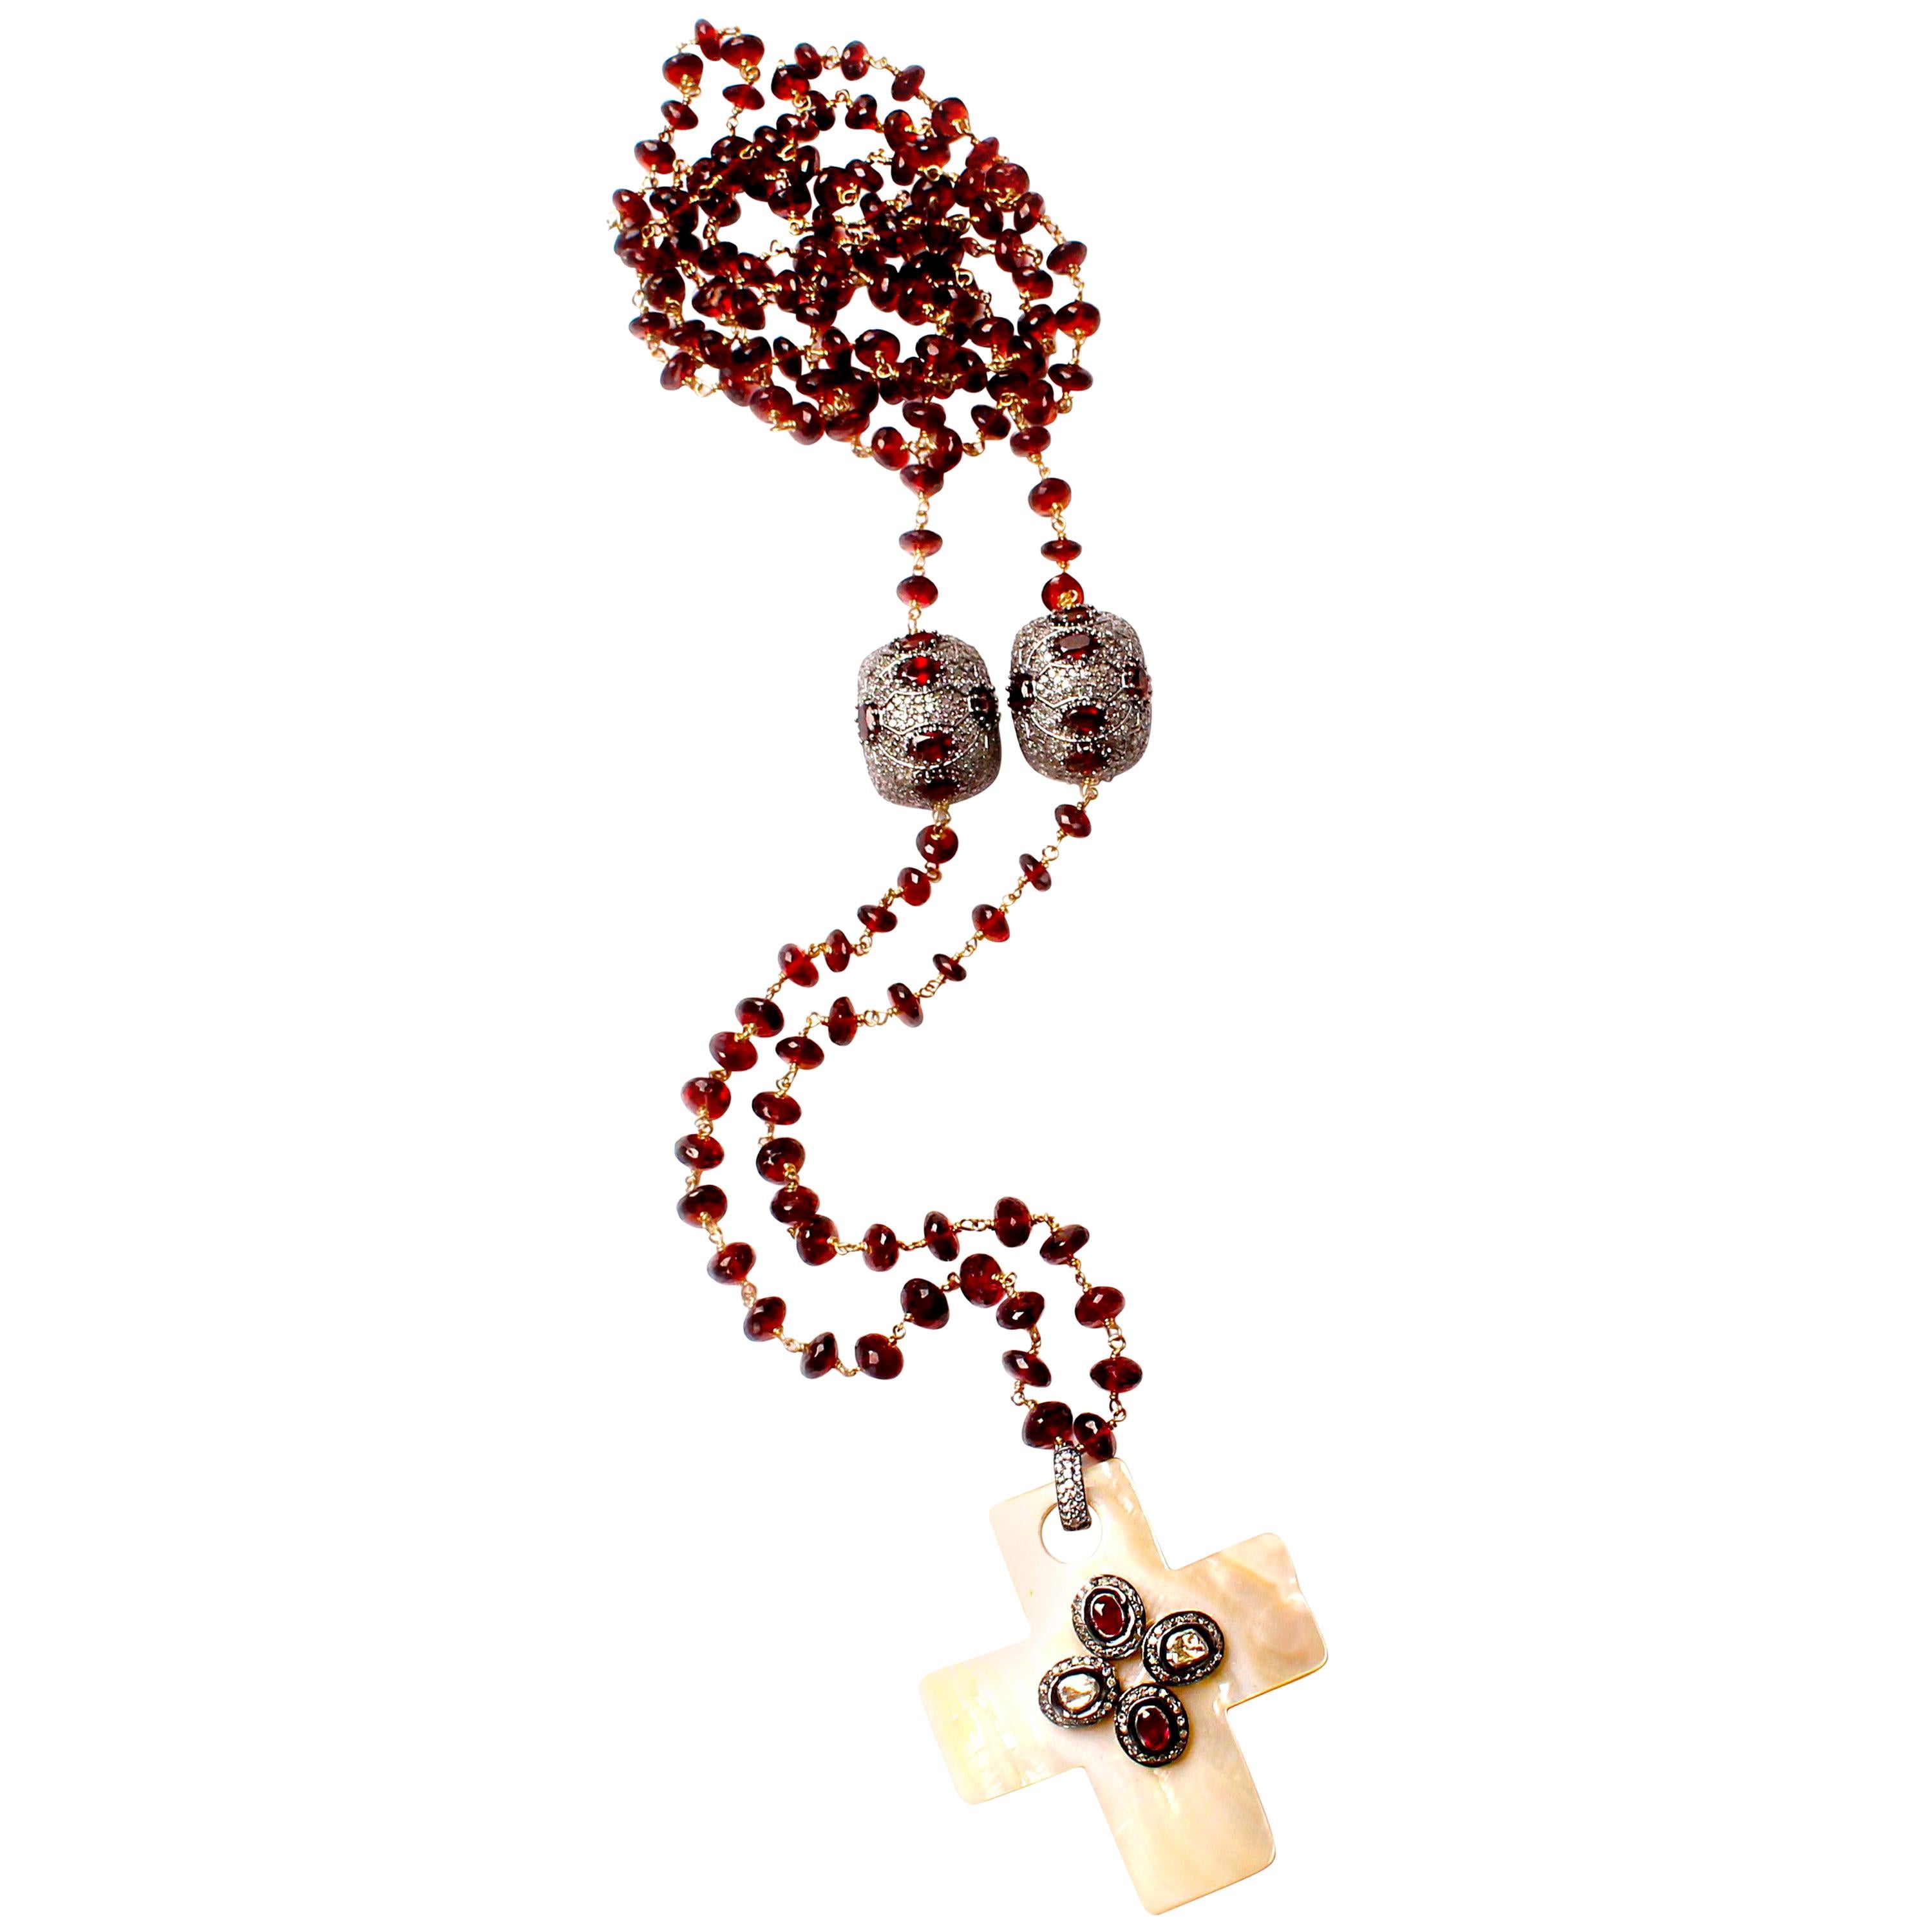 Clarissa Bronfman Garnet, Diamond, Ruby, and Mother-of-Pearl Beaded Necklace